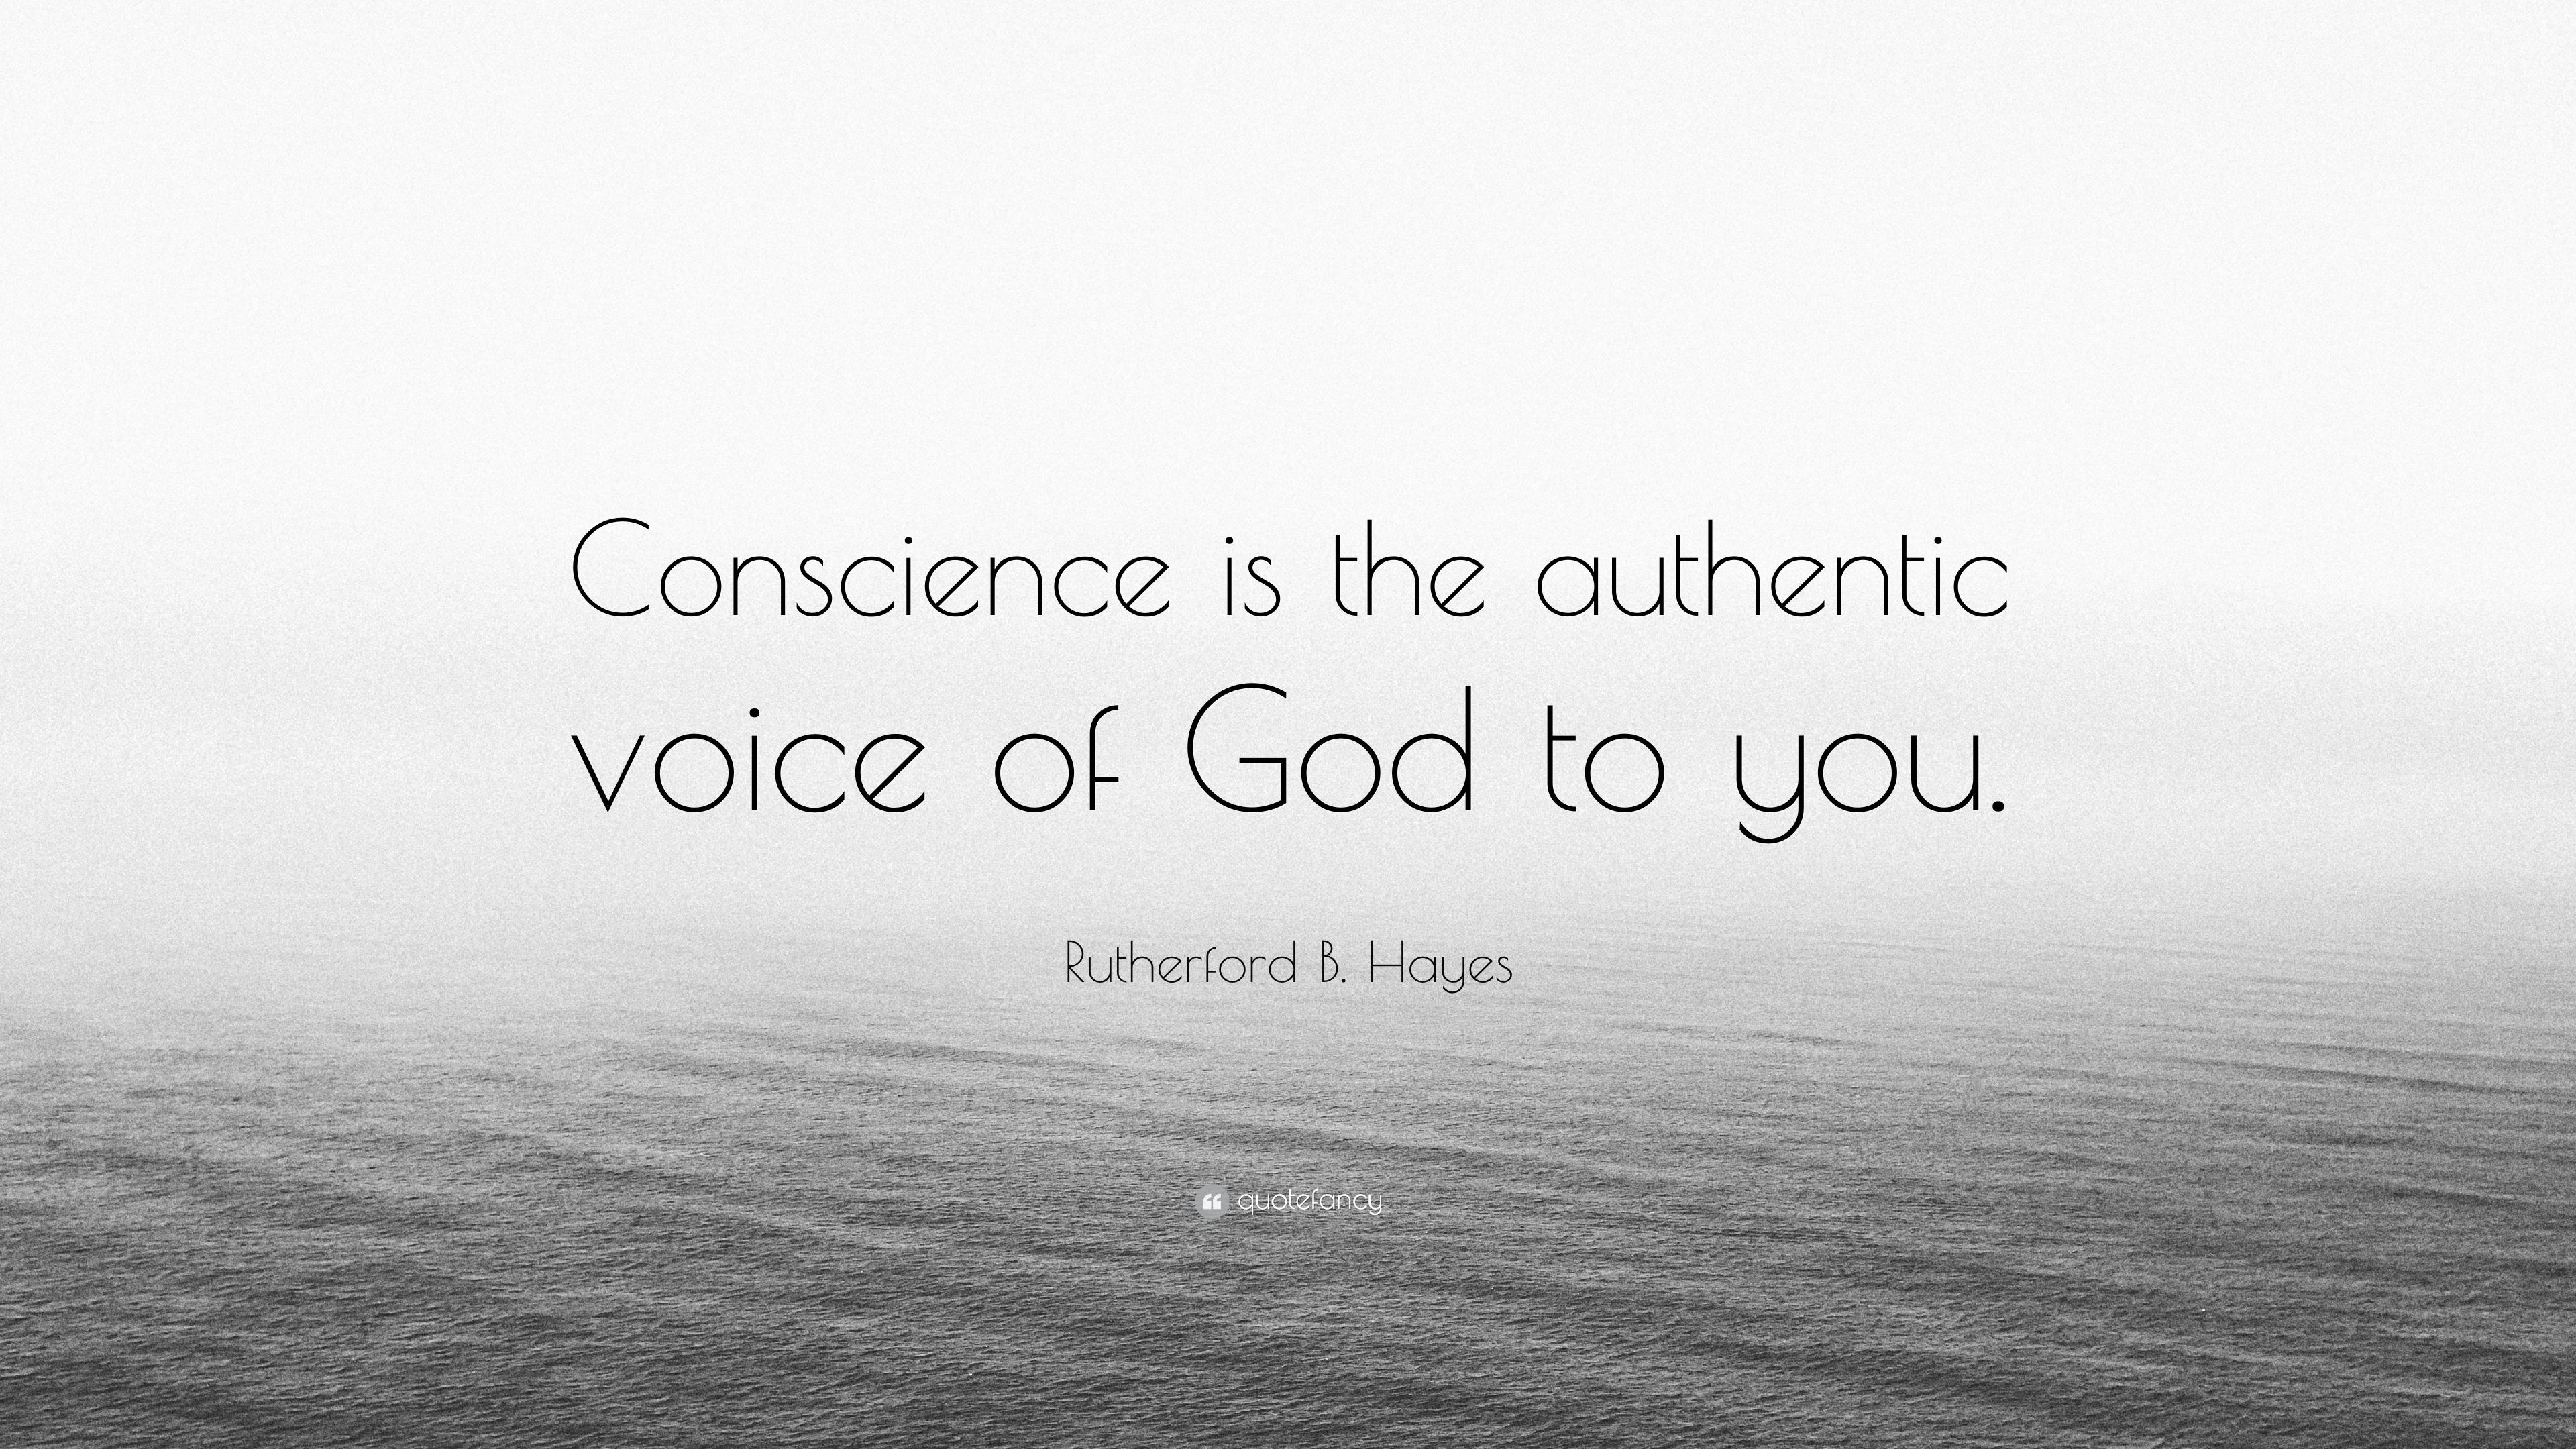 Rutherford B. Hayes Quote: “Conscience is the authentic voice of God to you.” (7 wallpaper)